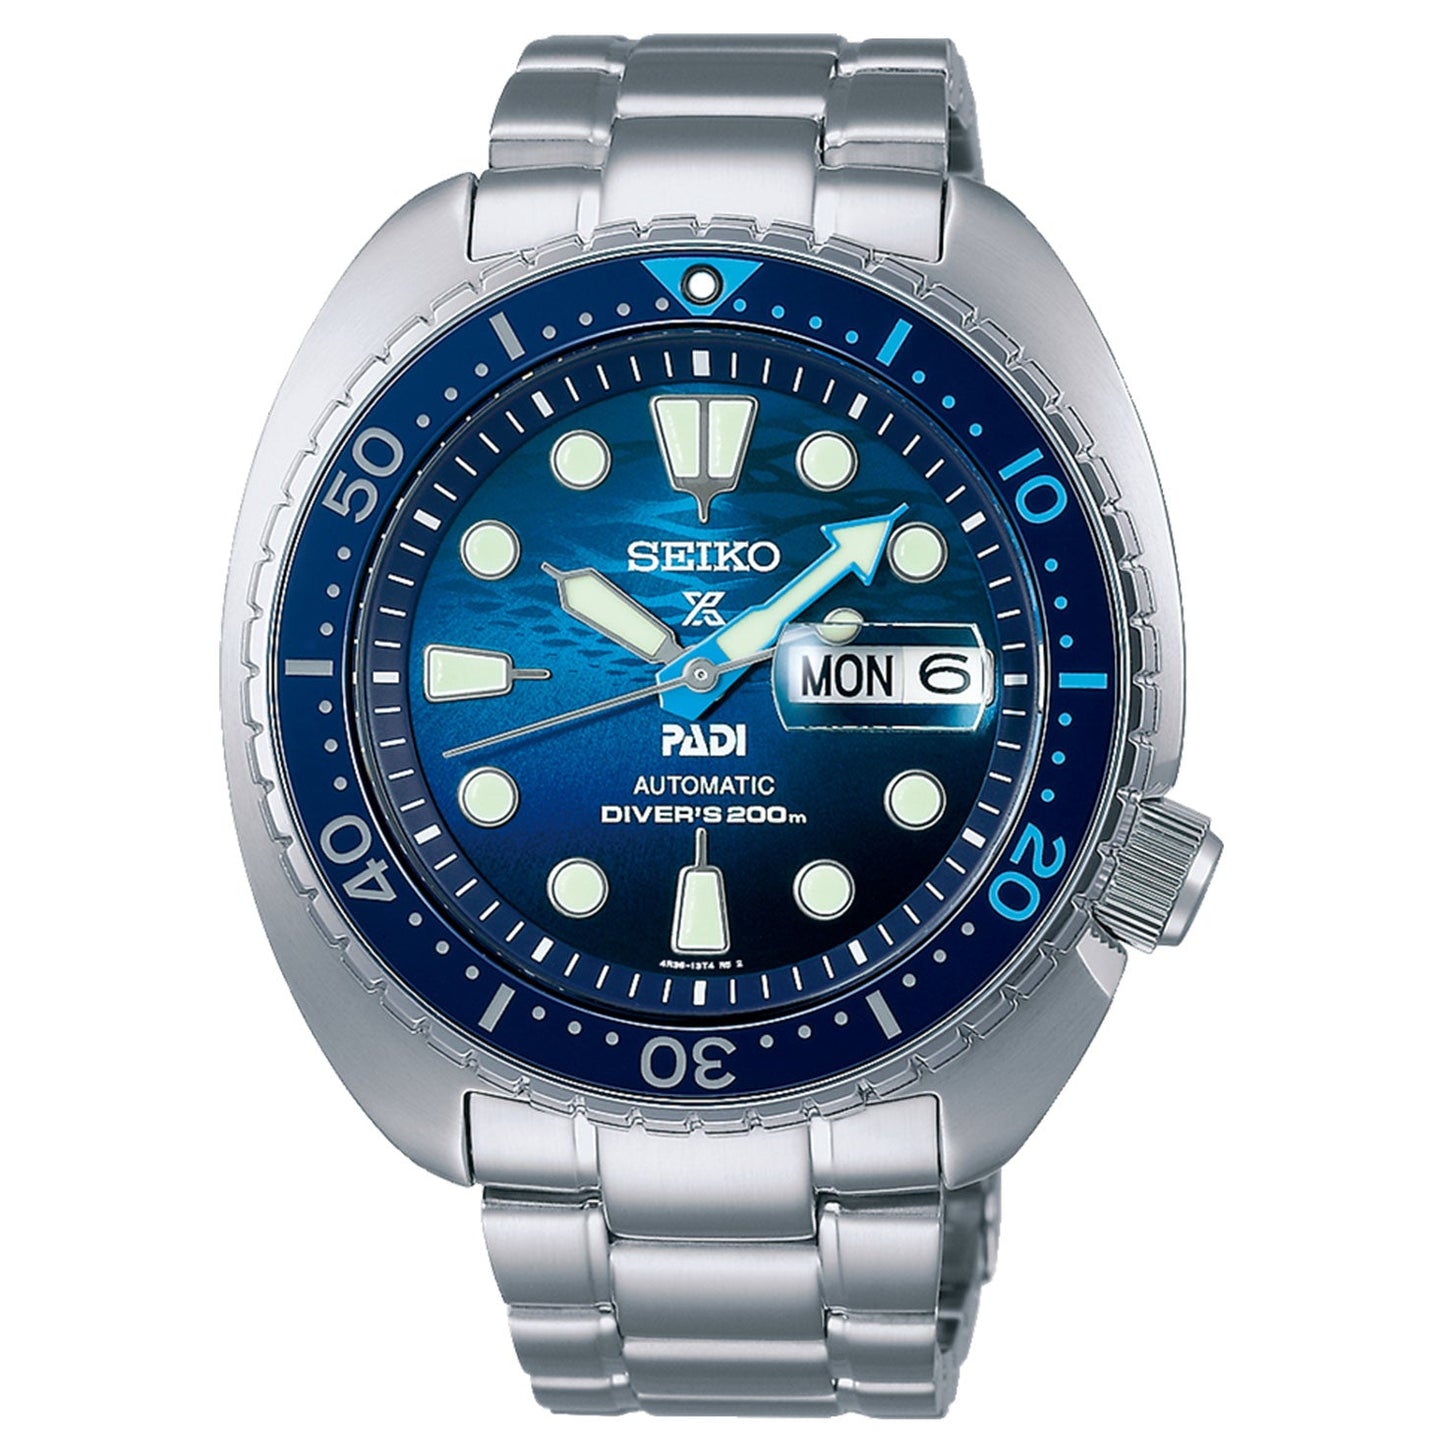 Seiko Prospex Sea Automatic With Manual Winding 45mm Watch PADI Special Edition